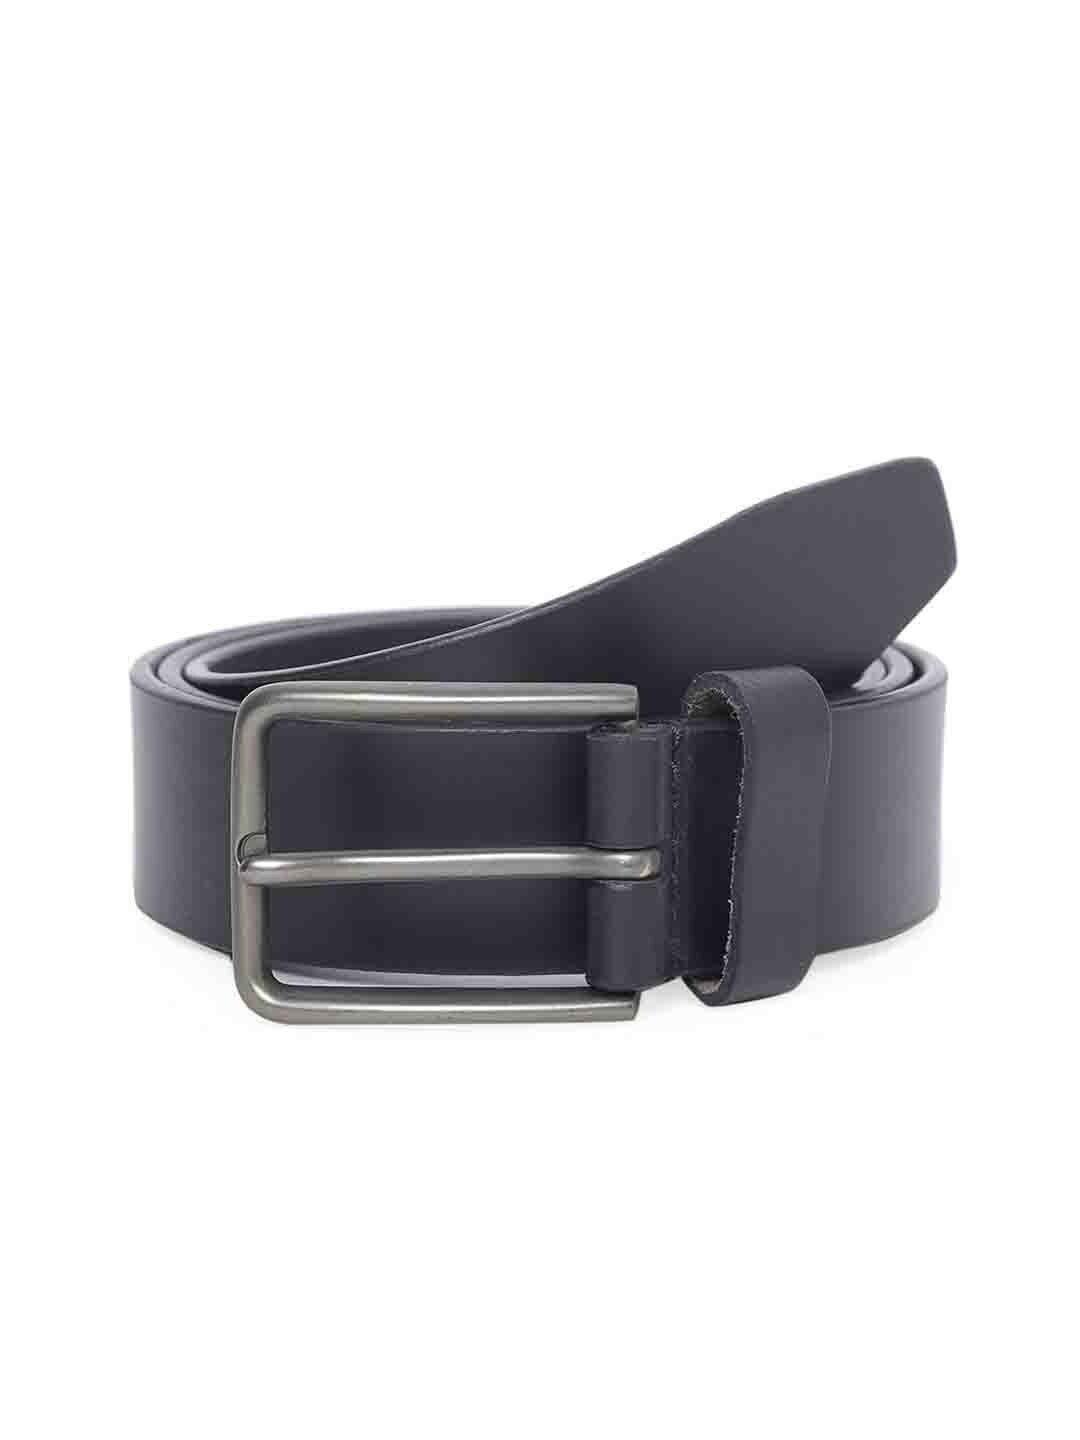 tom lang london men solid leather belt with tang closure